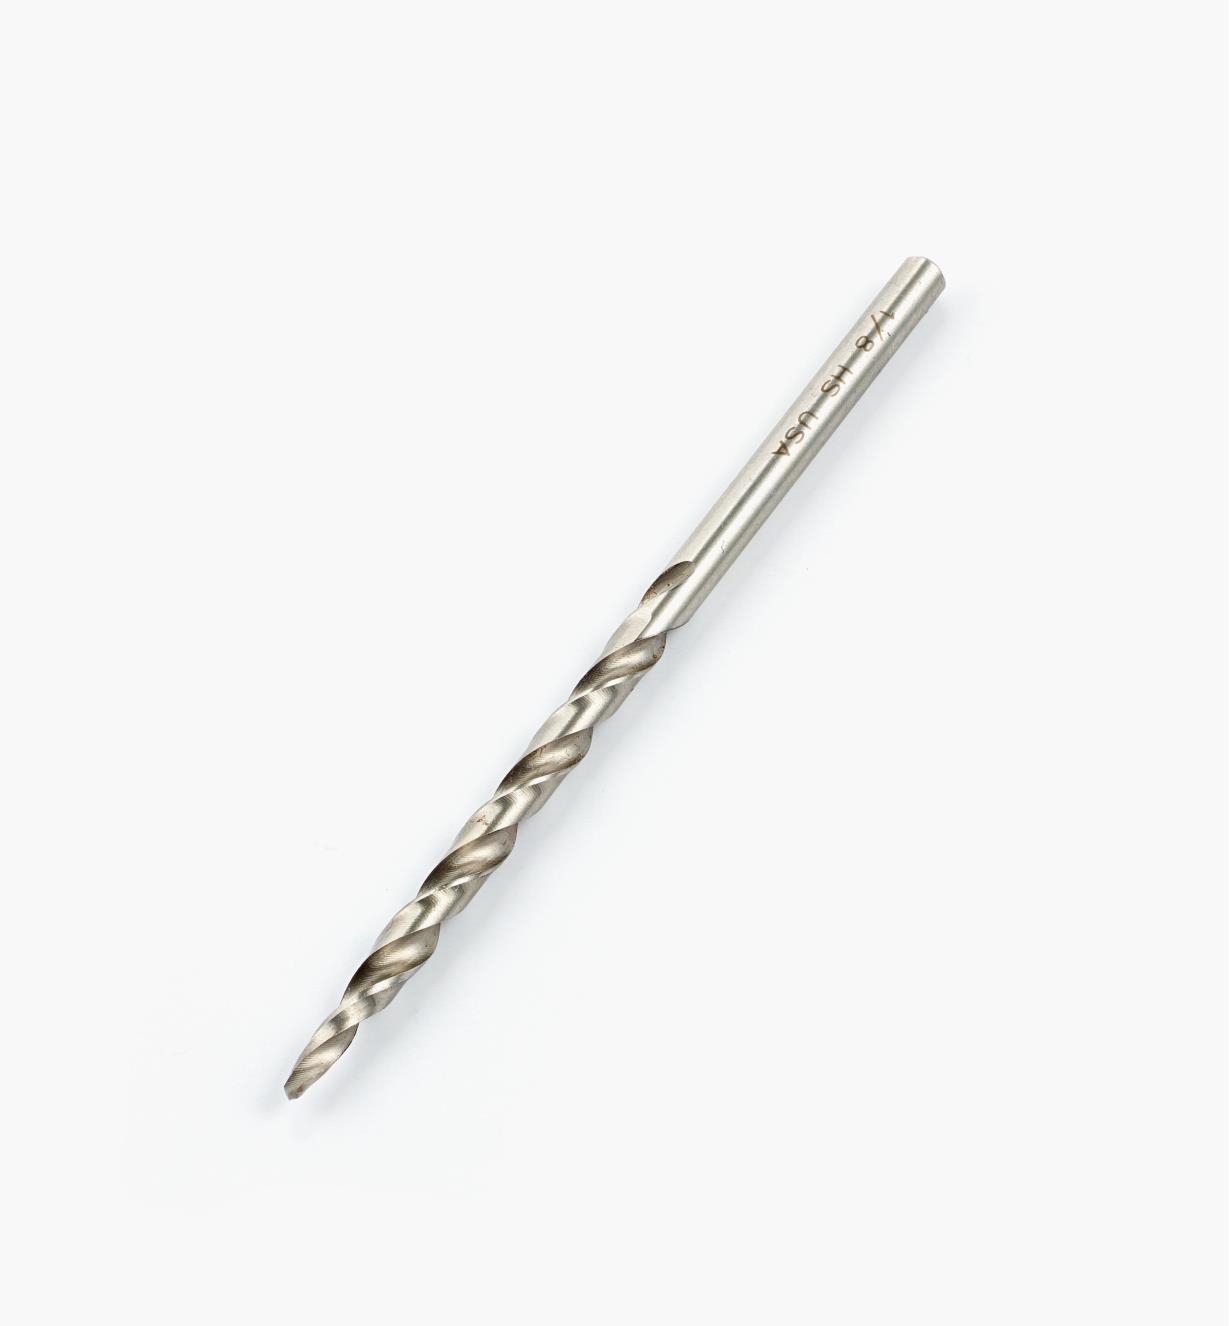 What Is a Tapered Drill Bit?